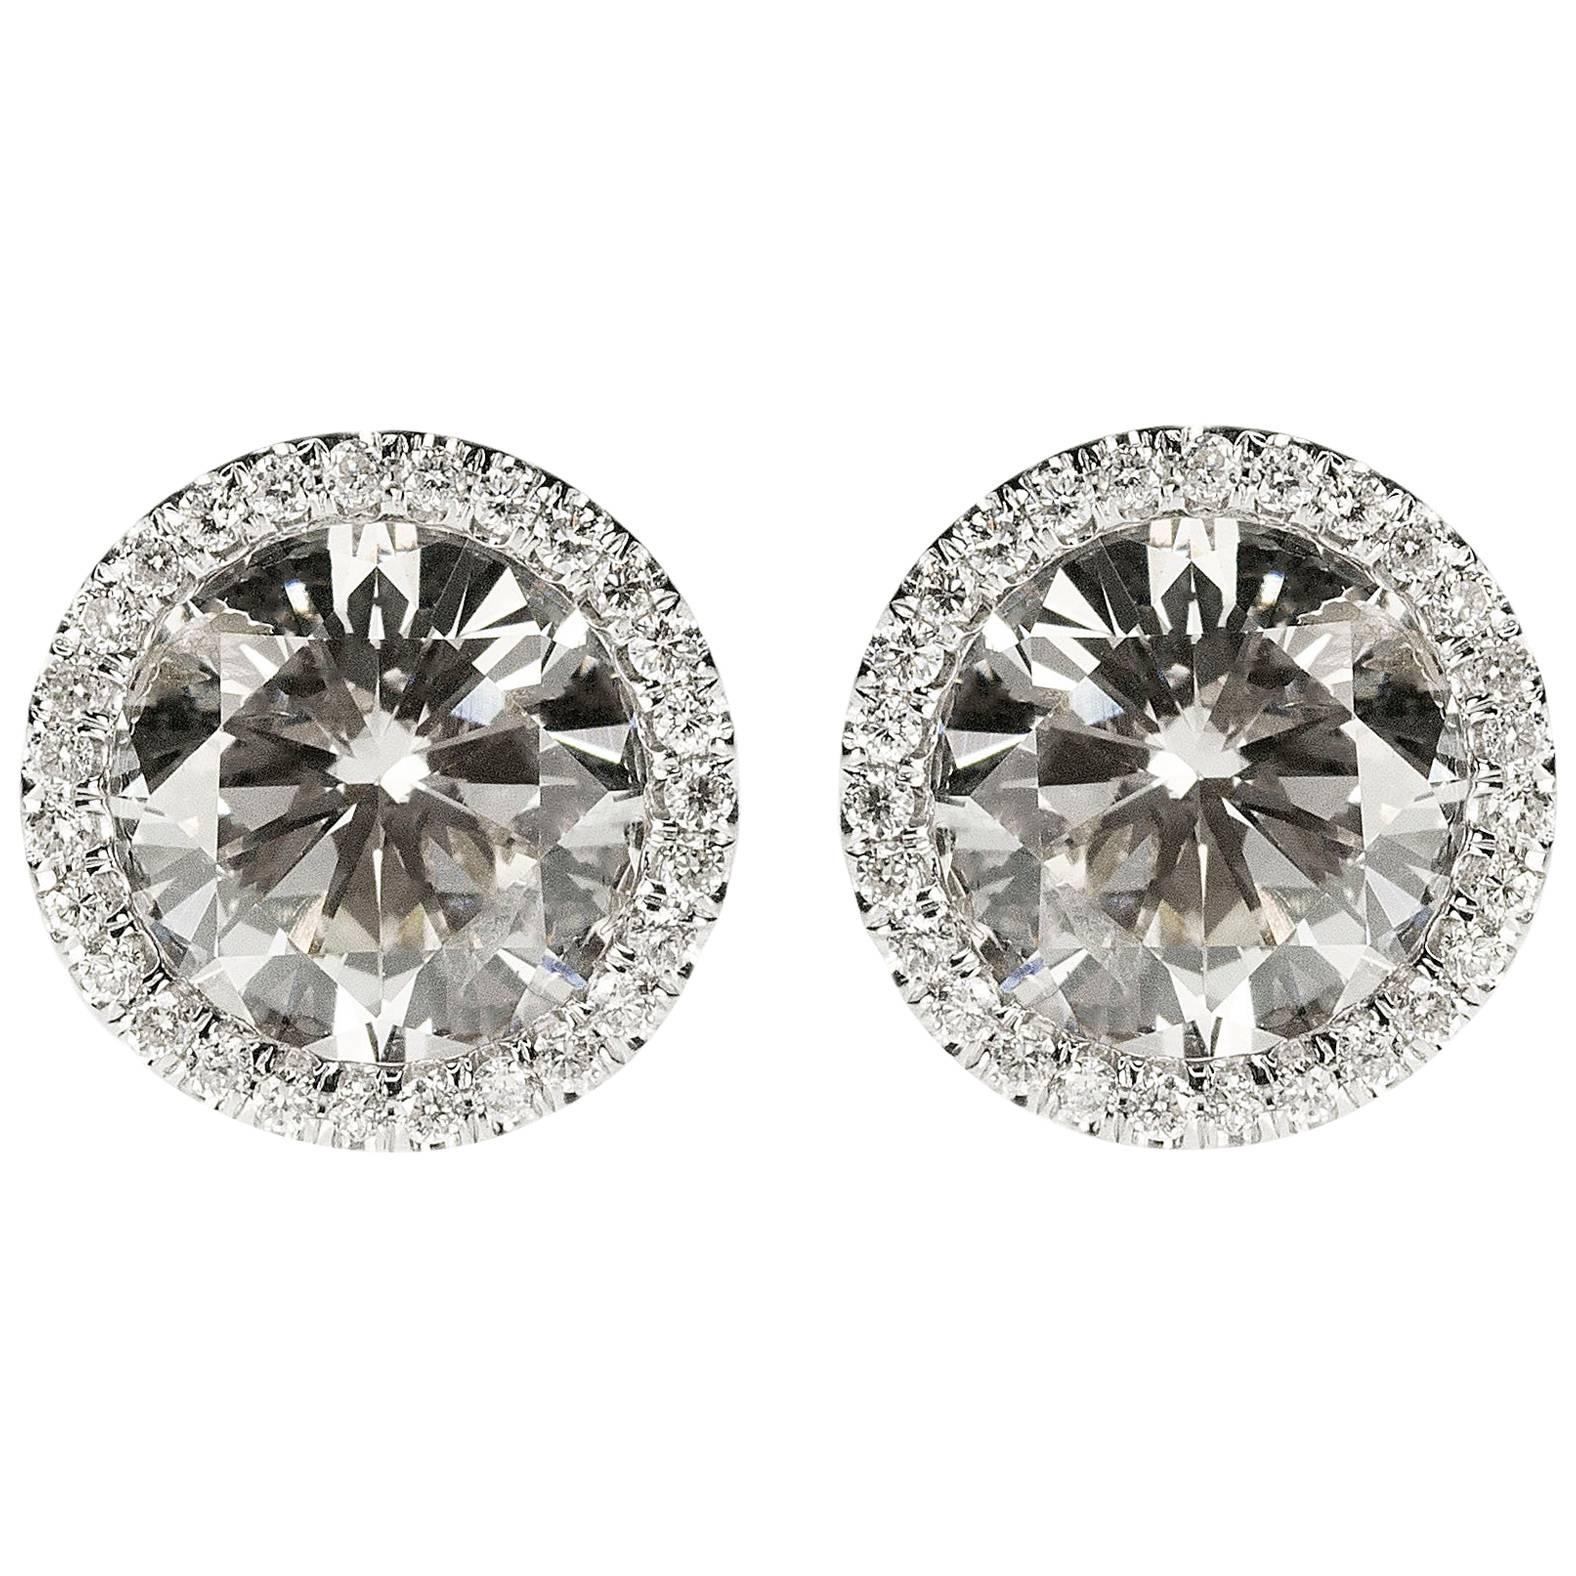 3.70 Carat Total Weight Studs For Sale